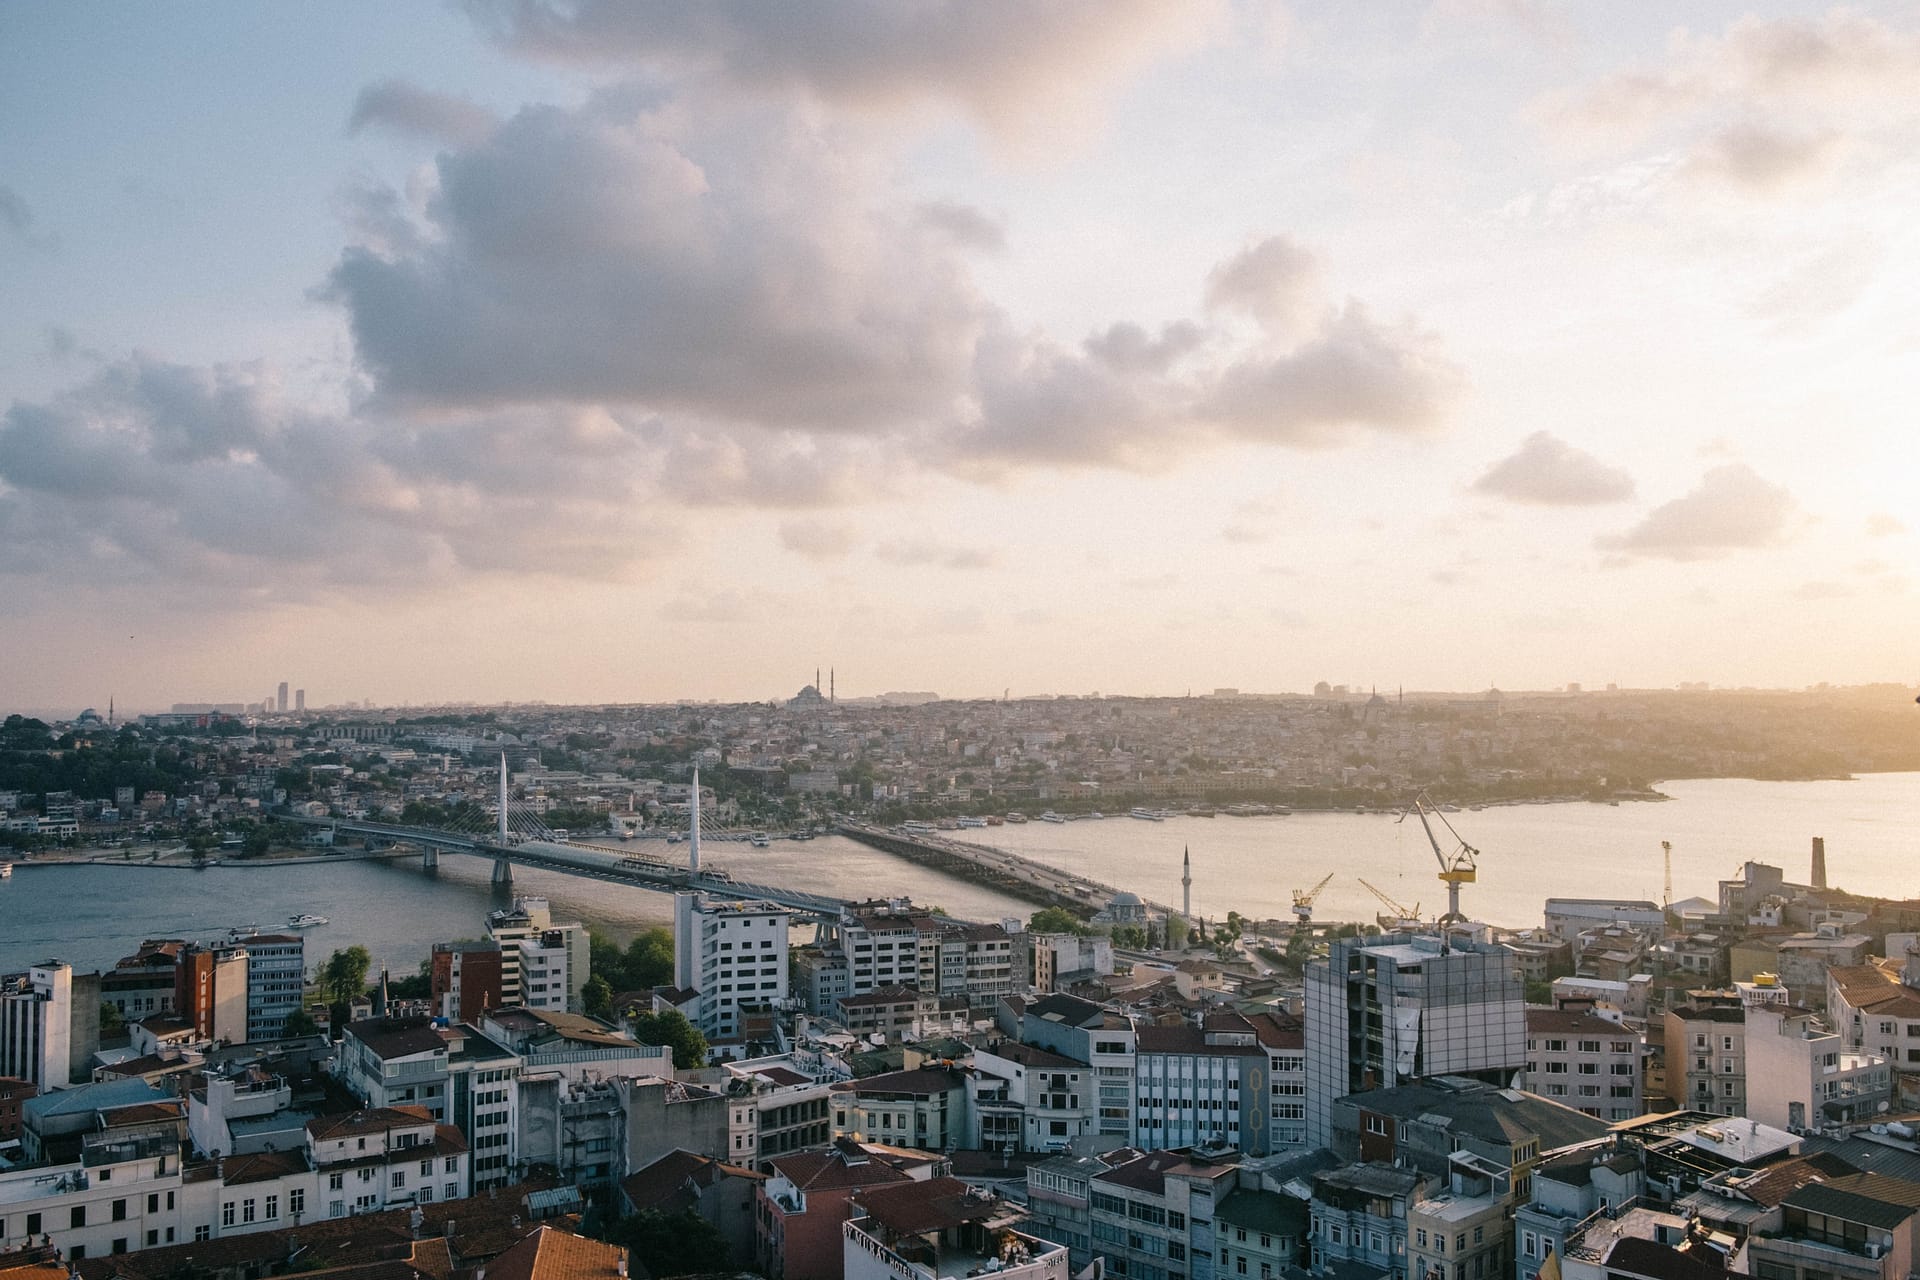 Instanbul at Sunset